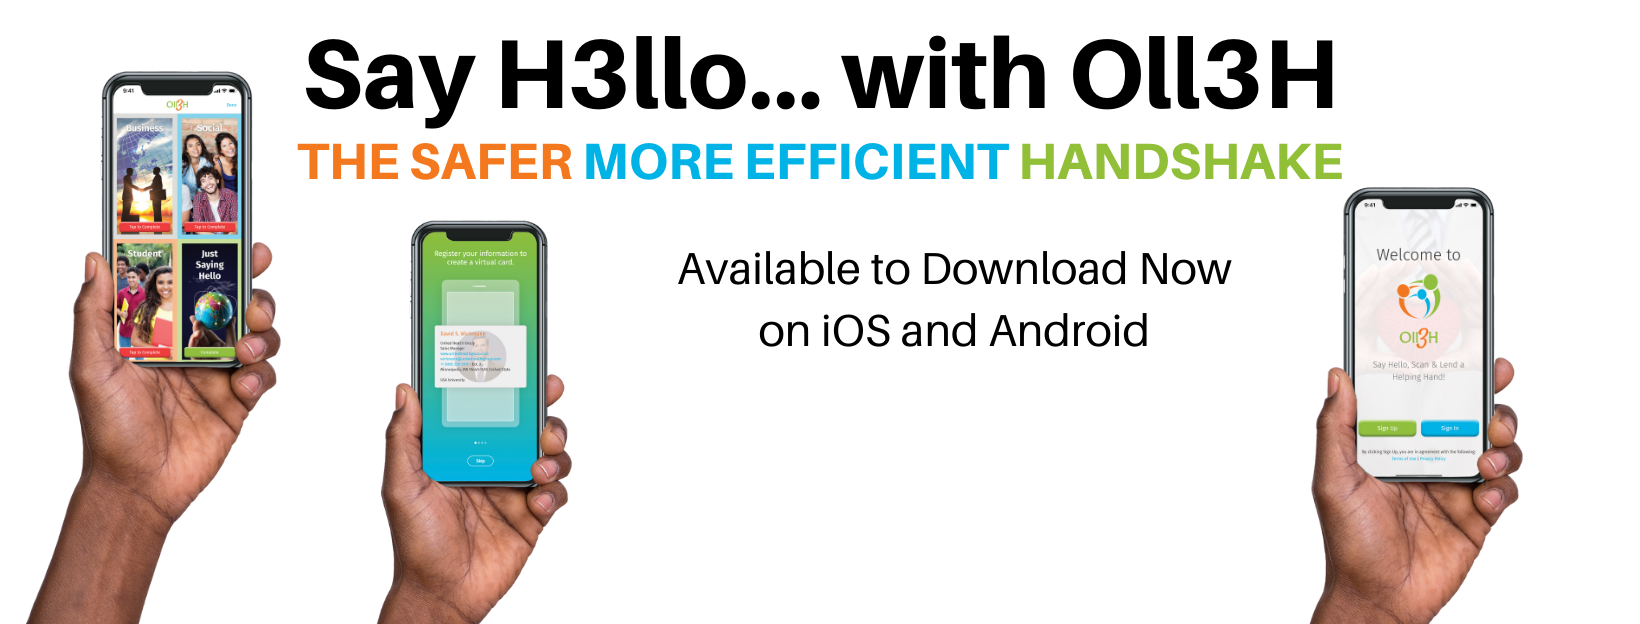 Oll3H: Say Hello to Connecting